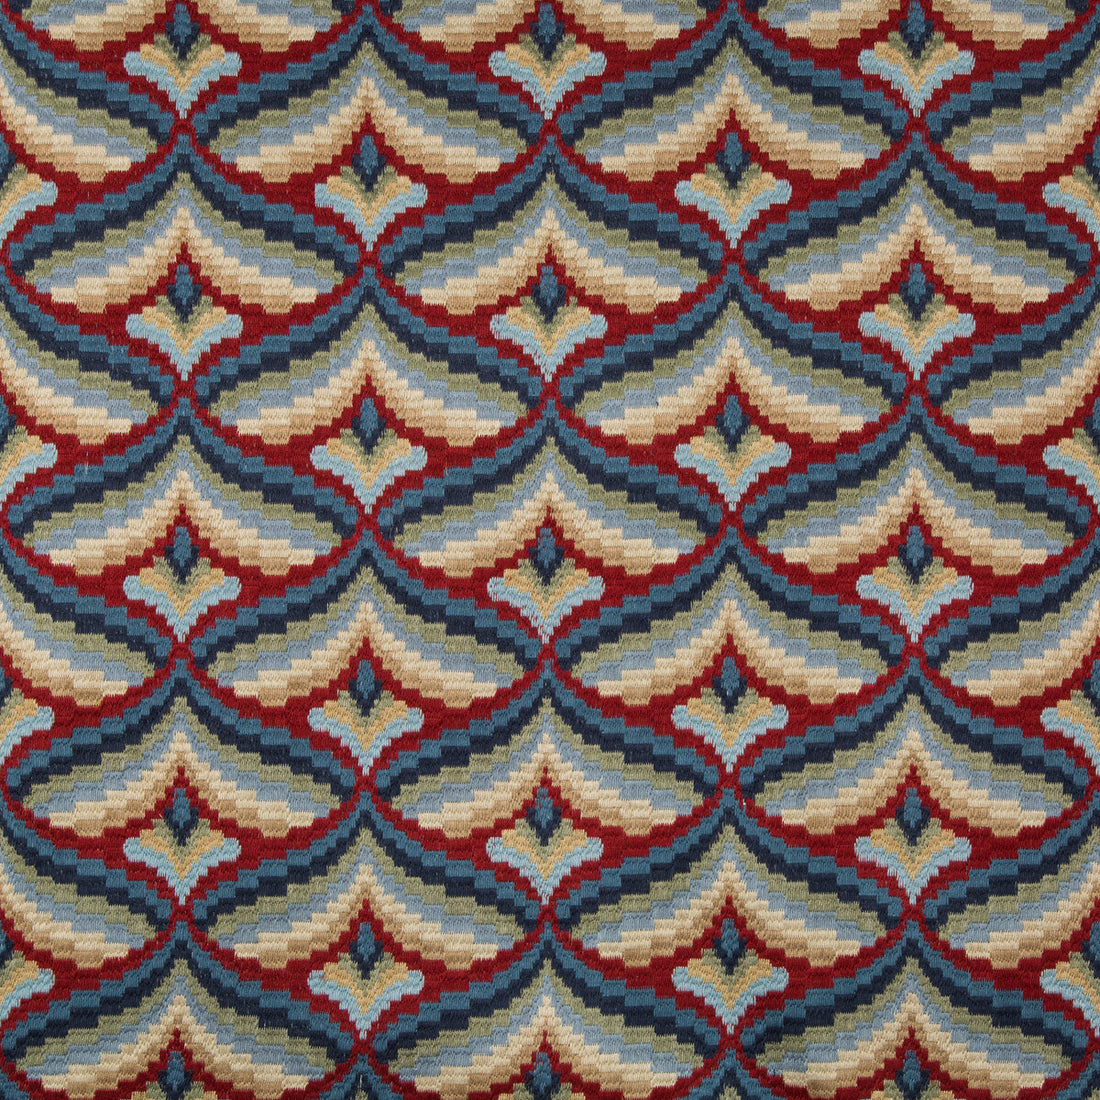 Giles Embroidery fabric in red/blue color - pattern 2019106.195.0 - by Lee Jofa in the Manor House collection